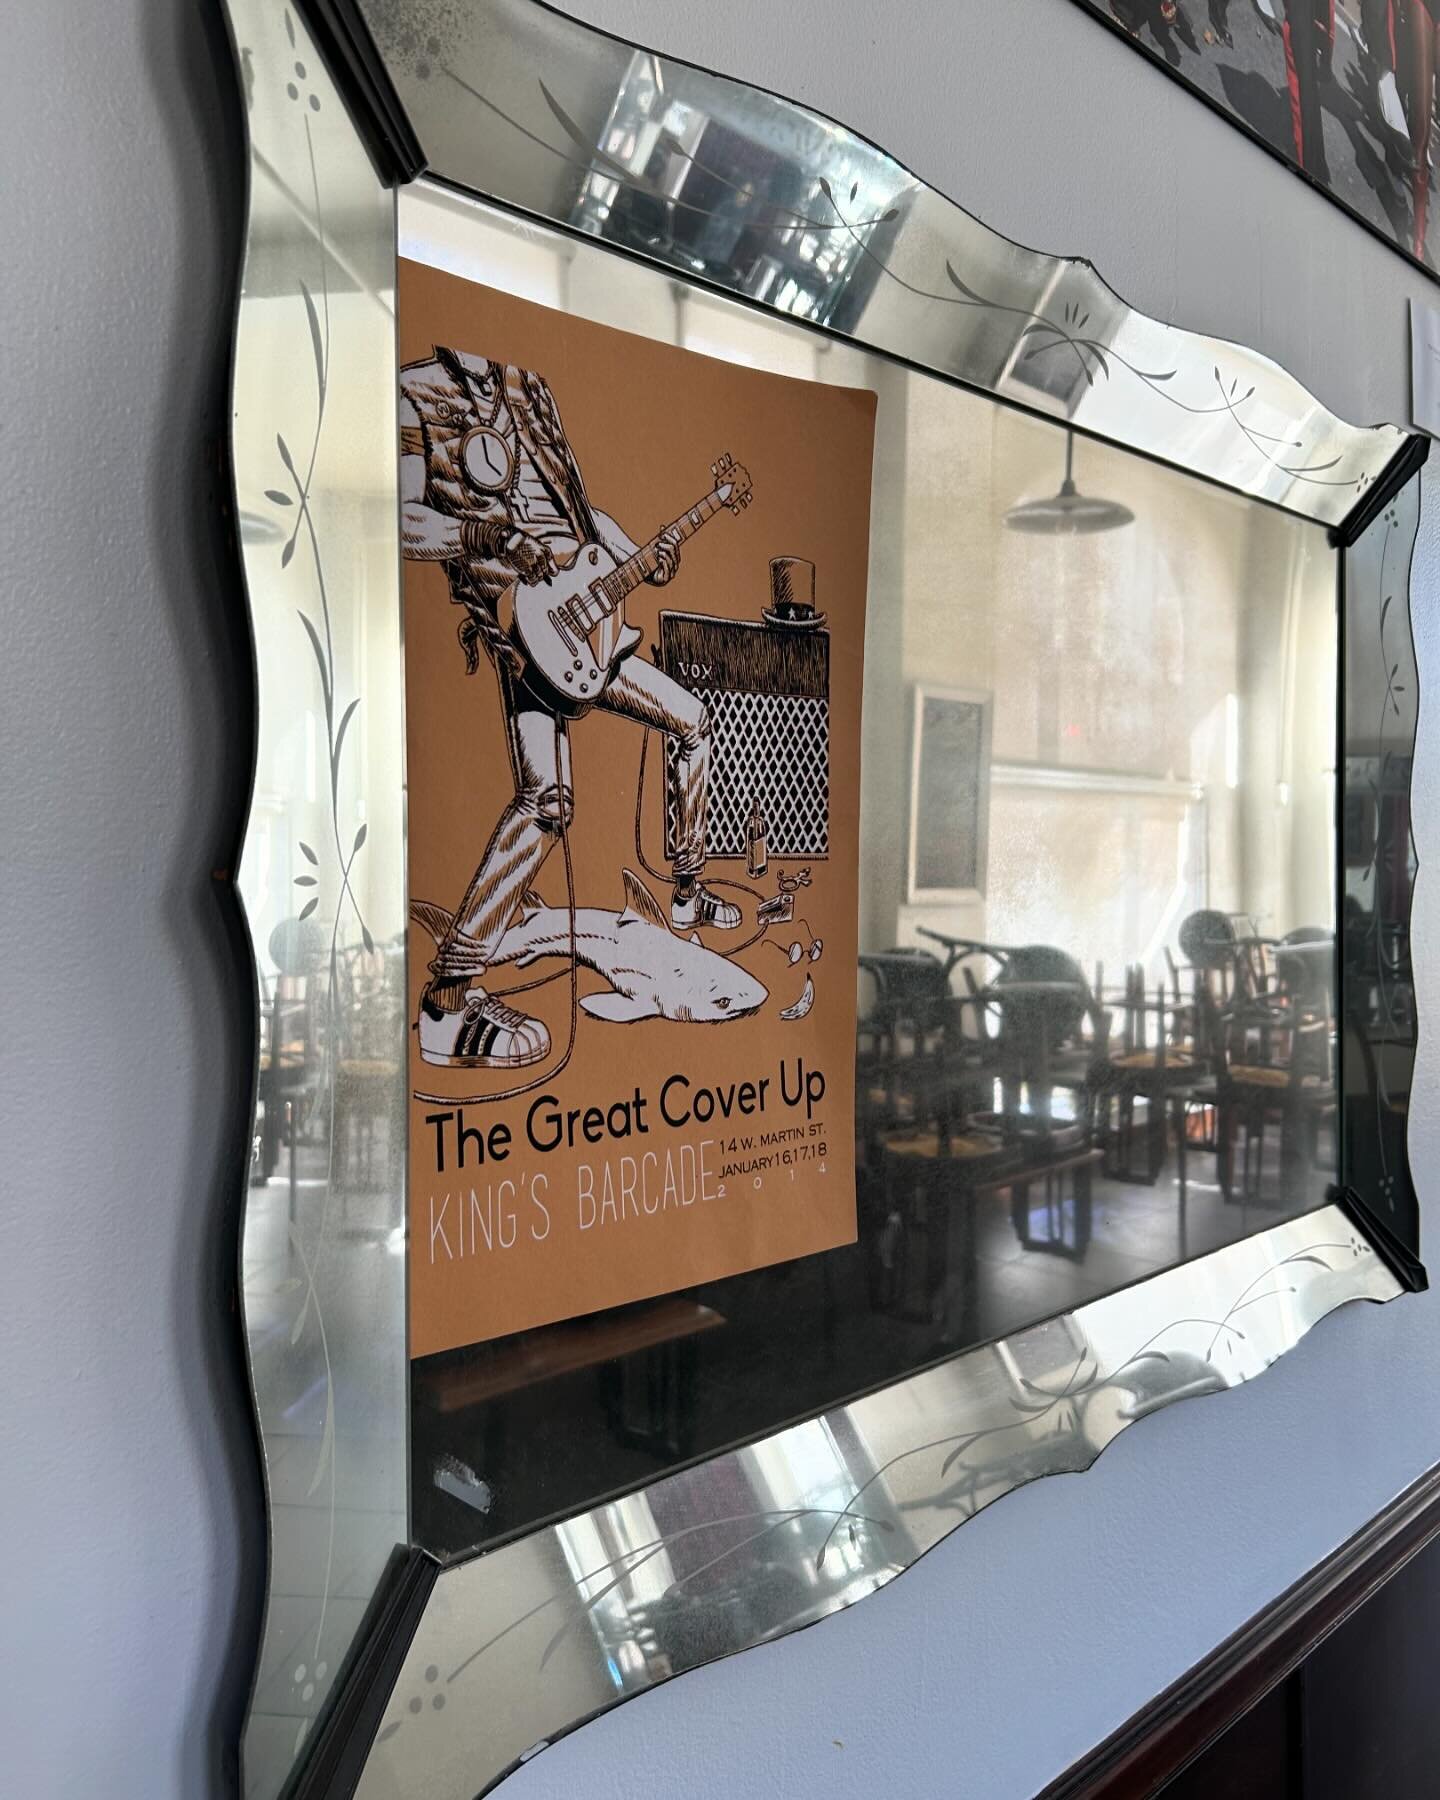 Open today lunch 11:30-3 and dinner 5-9:30. Don&rsquo;t forget the #greatcoverup is @kingsraleigh tonight! 

A couple of posters from the @troubleberger archives and the Capital Club 16 treasure vault&hellip; the first one is 2014! 

#raleigh 
#downt